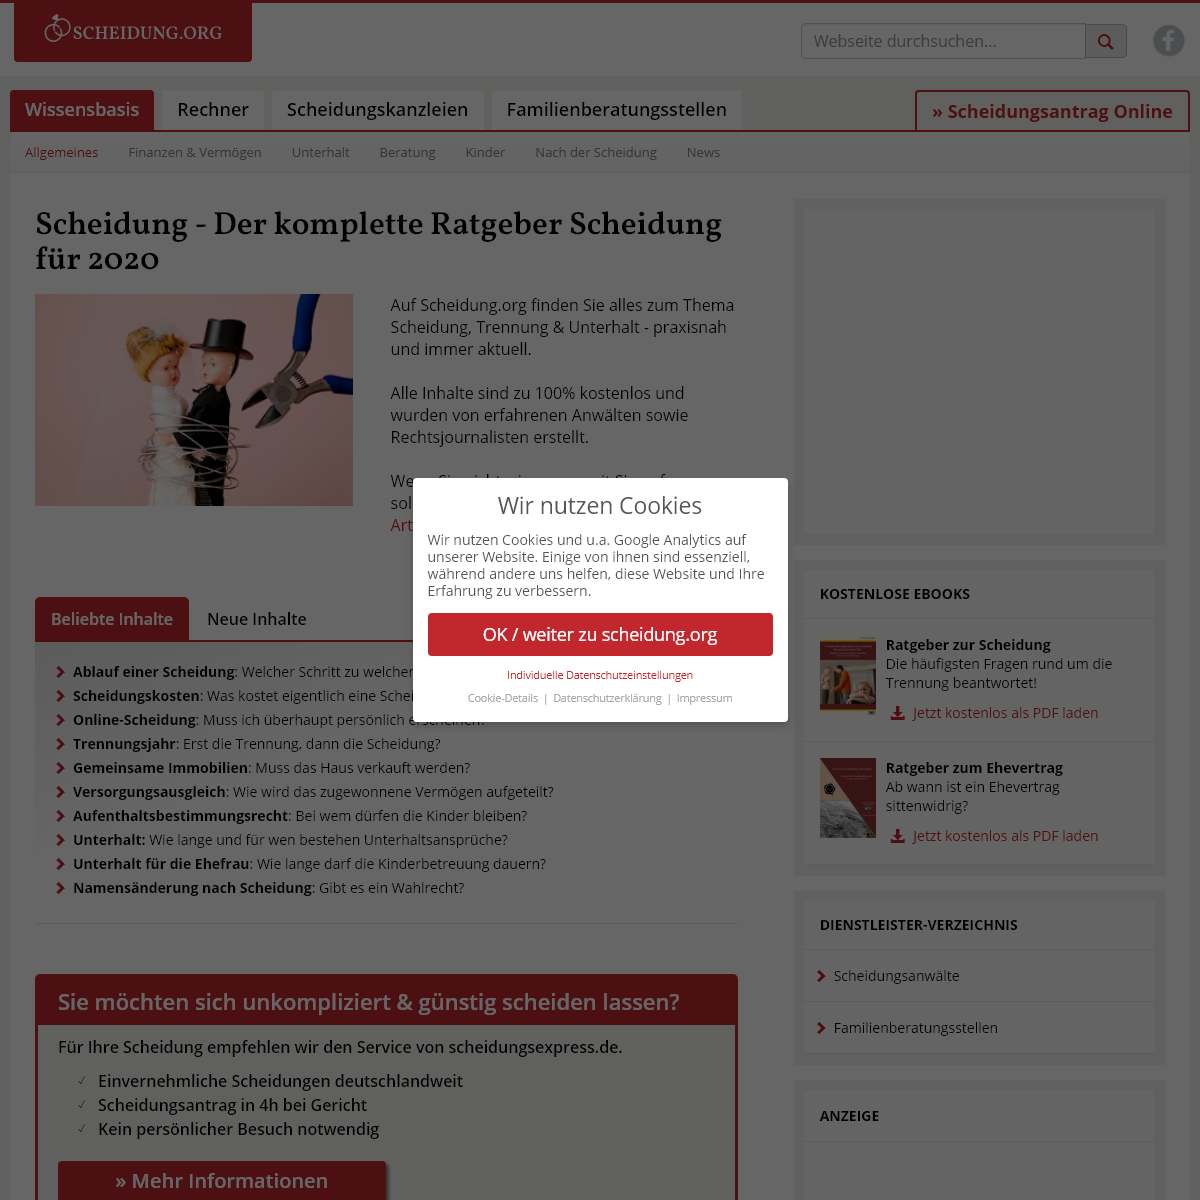 A complete backup of scheidung.org